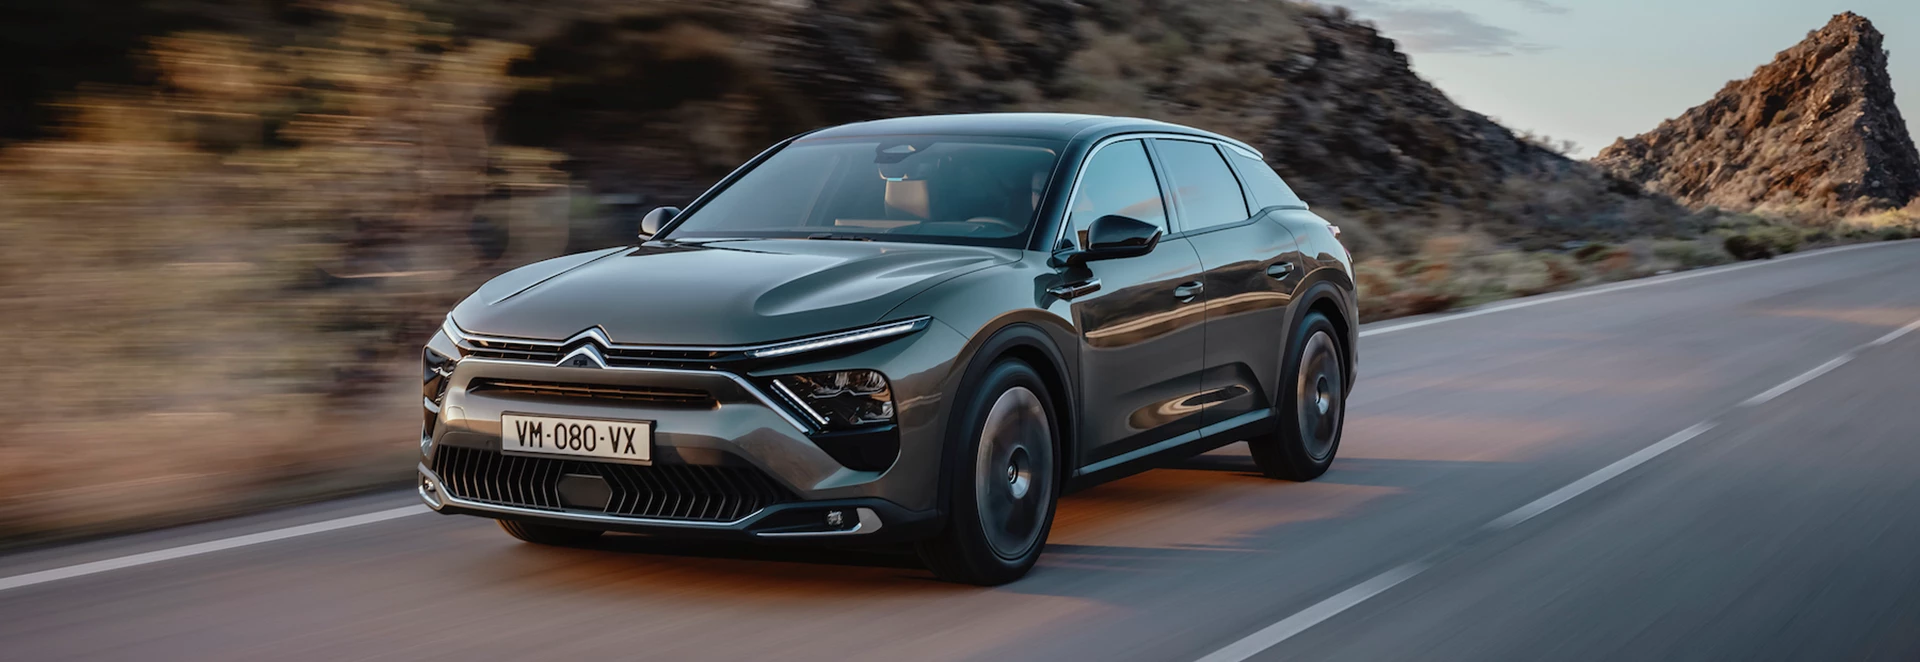 Citroen C5 X revealed as new flagship hatchback with SUV cues 